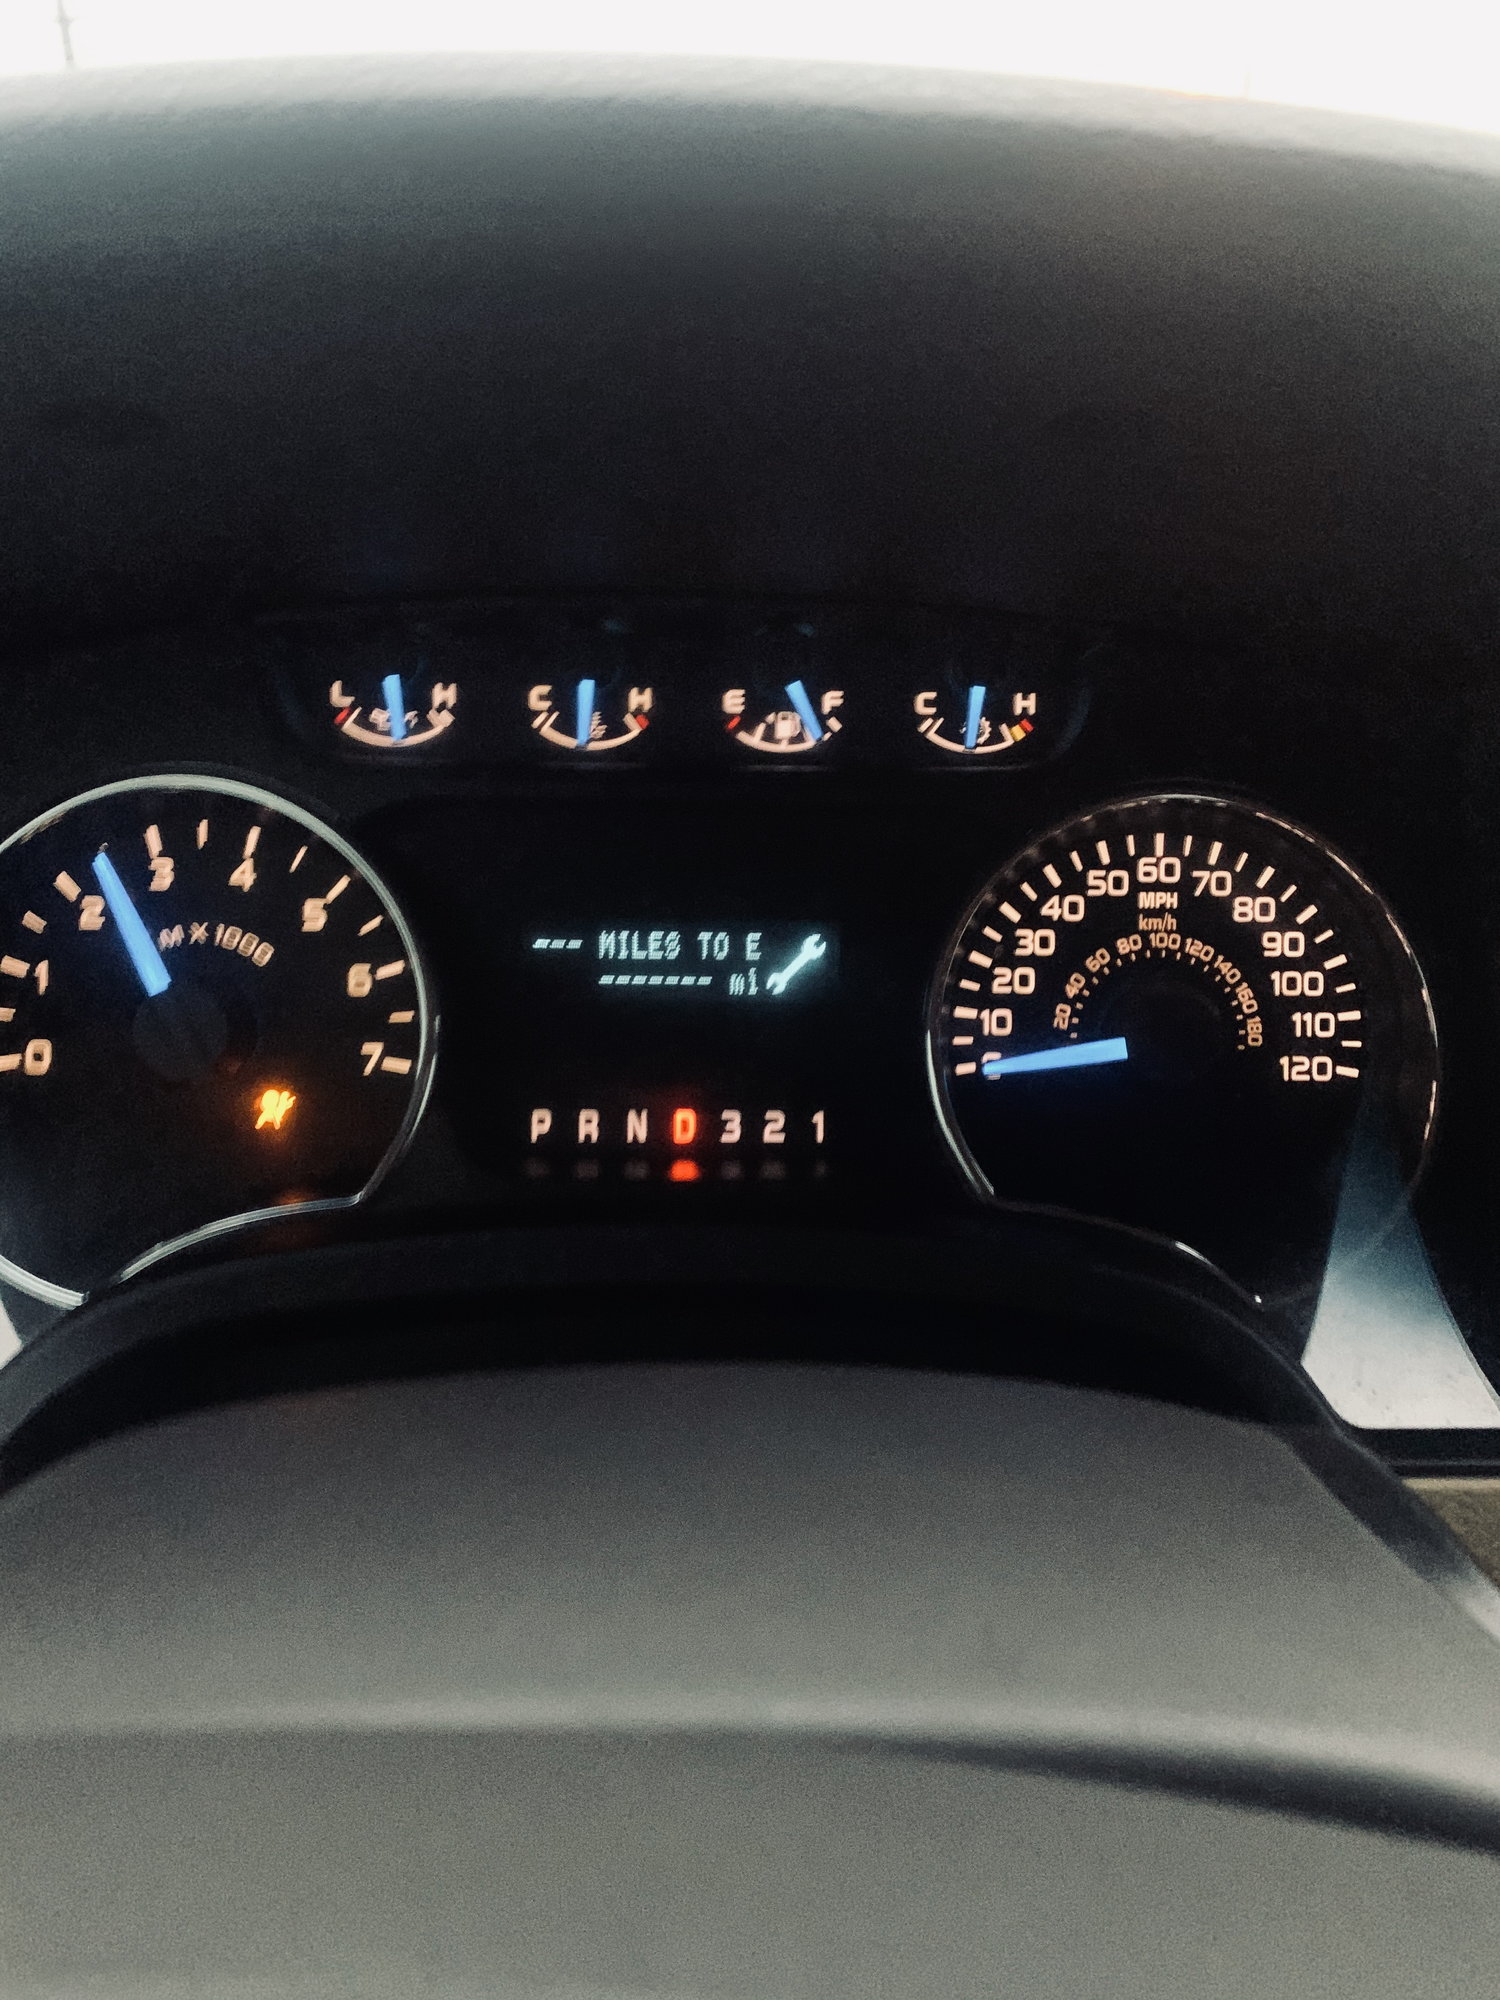 Speedometer Drops To Zero While Driving - Fix The System 2013 Chevy Spark Speedometer Not Working